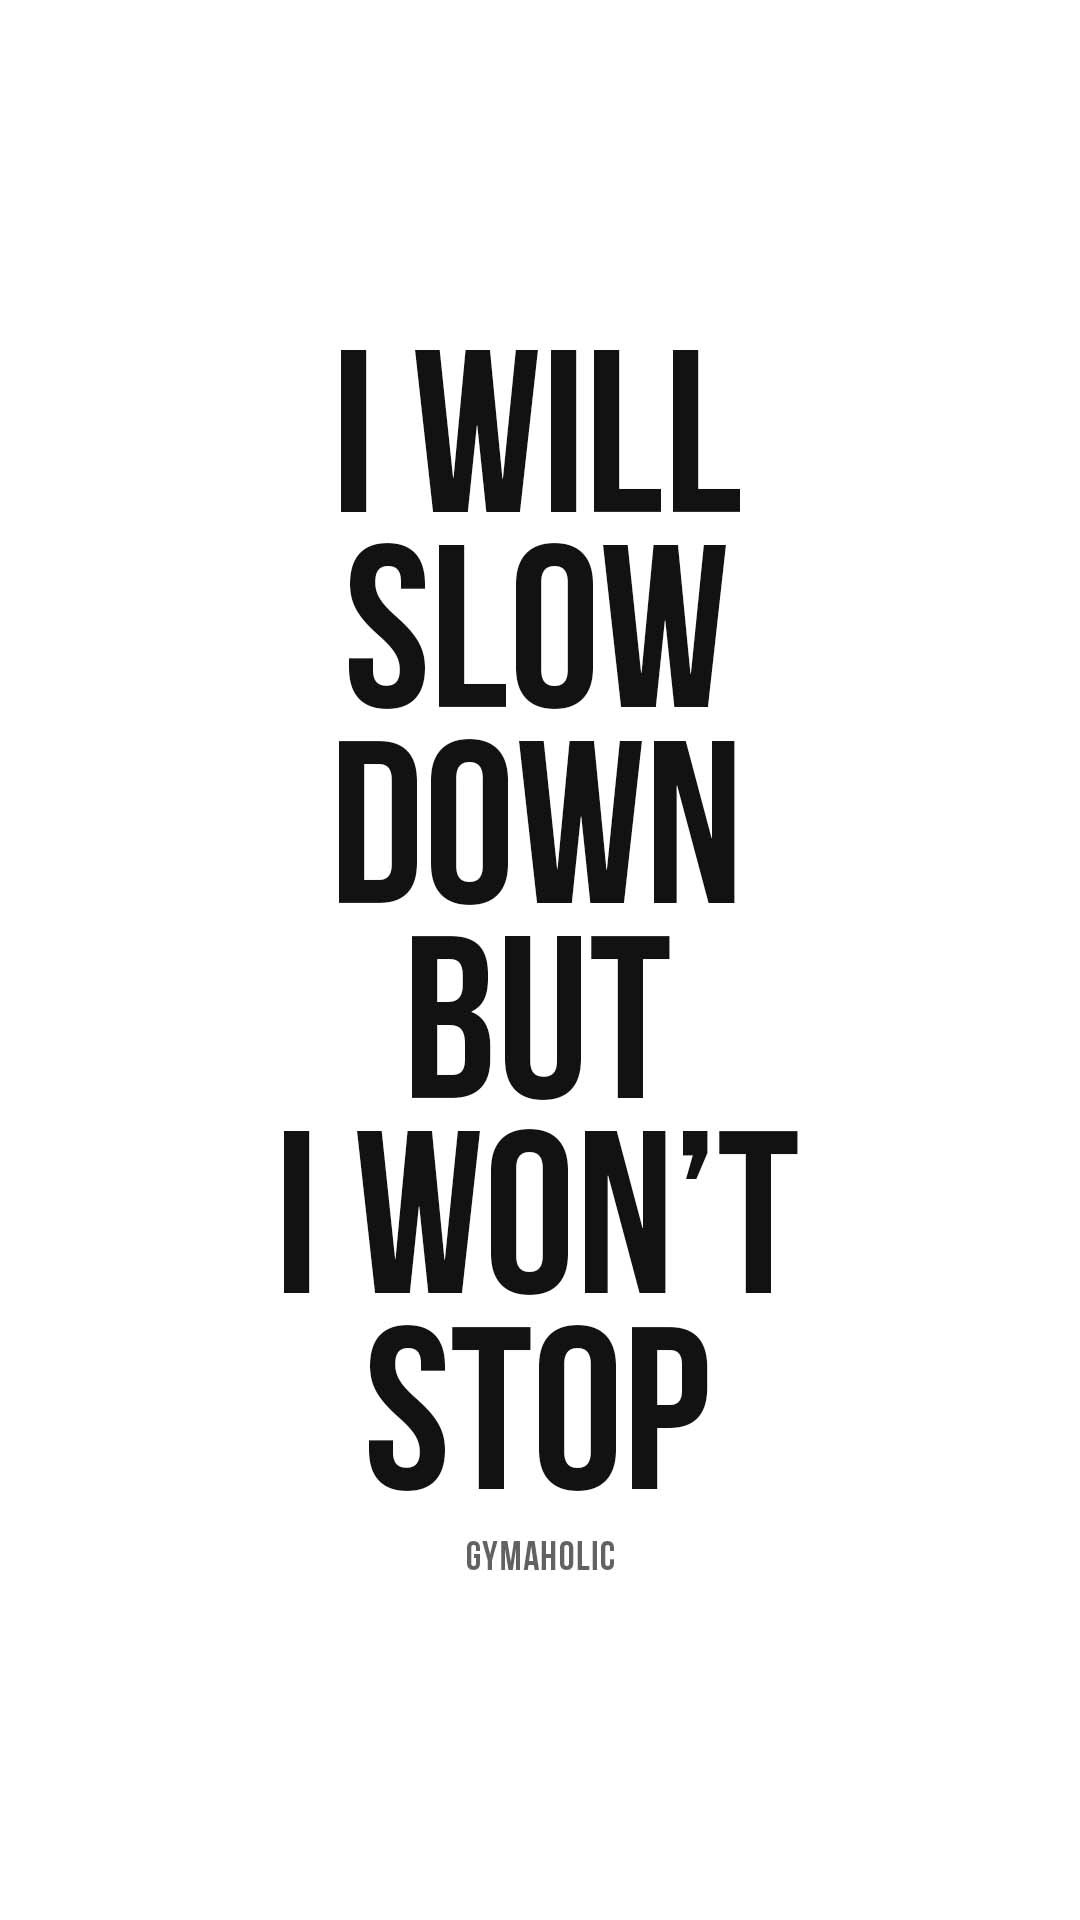 I will slow down